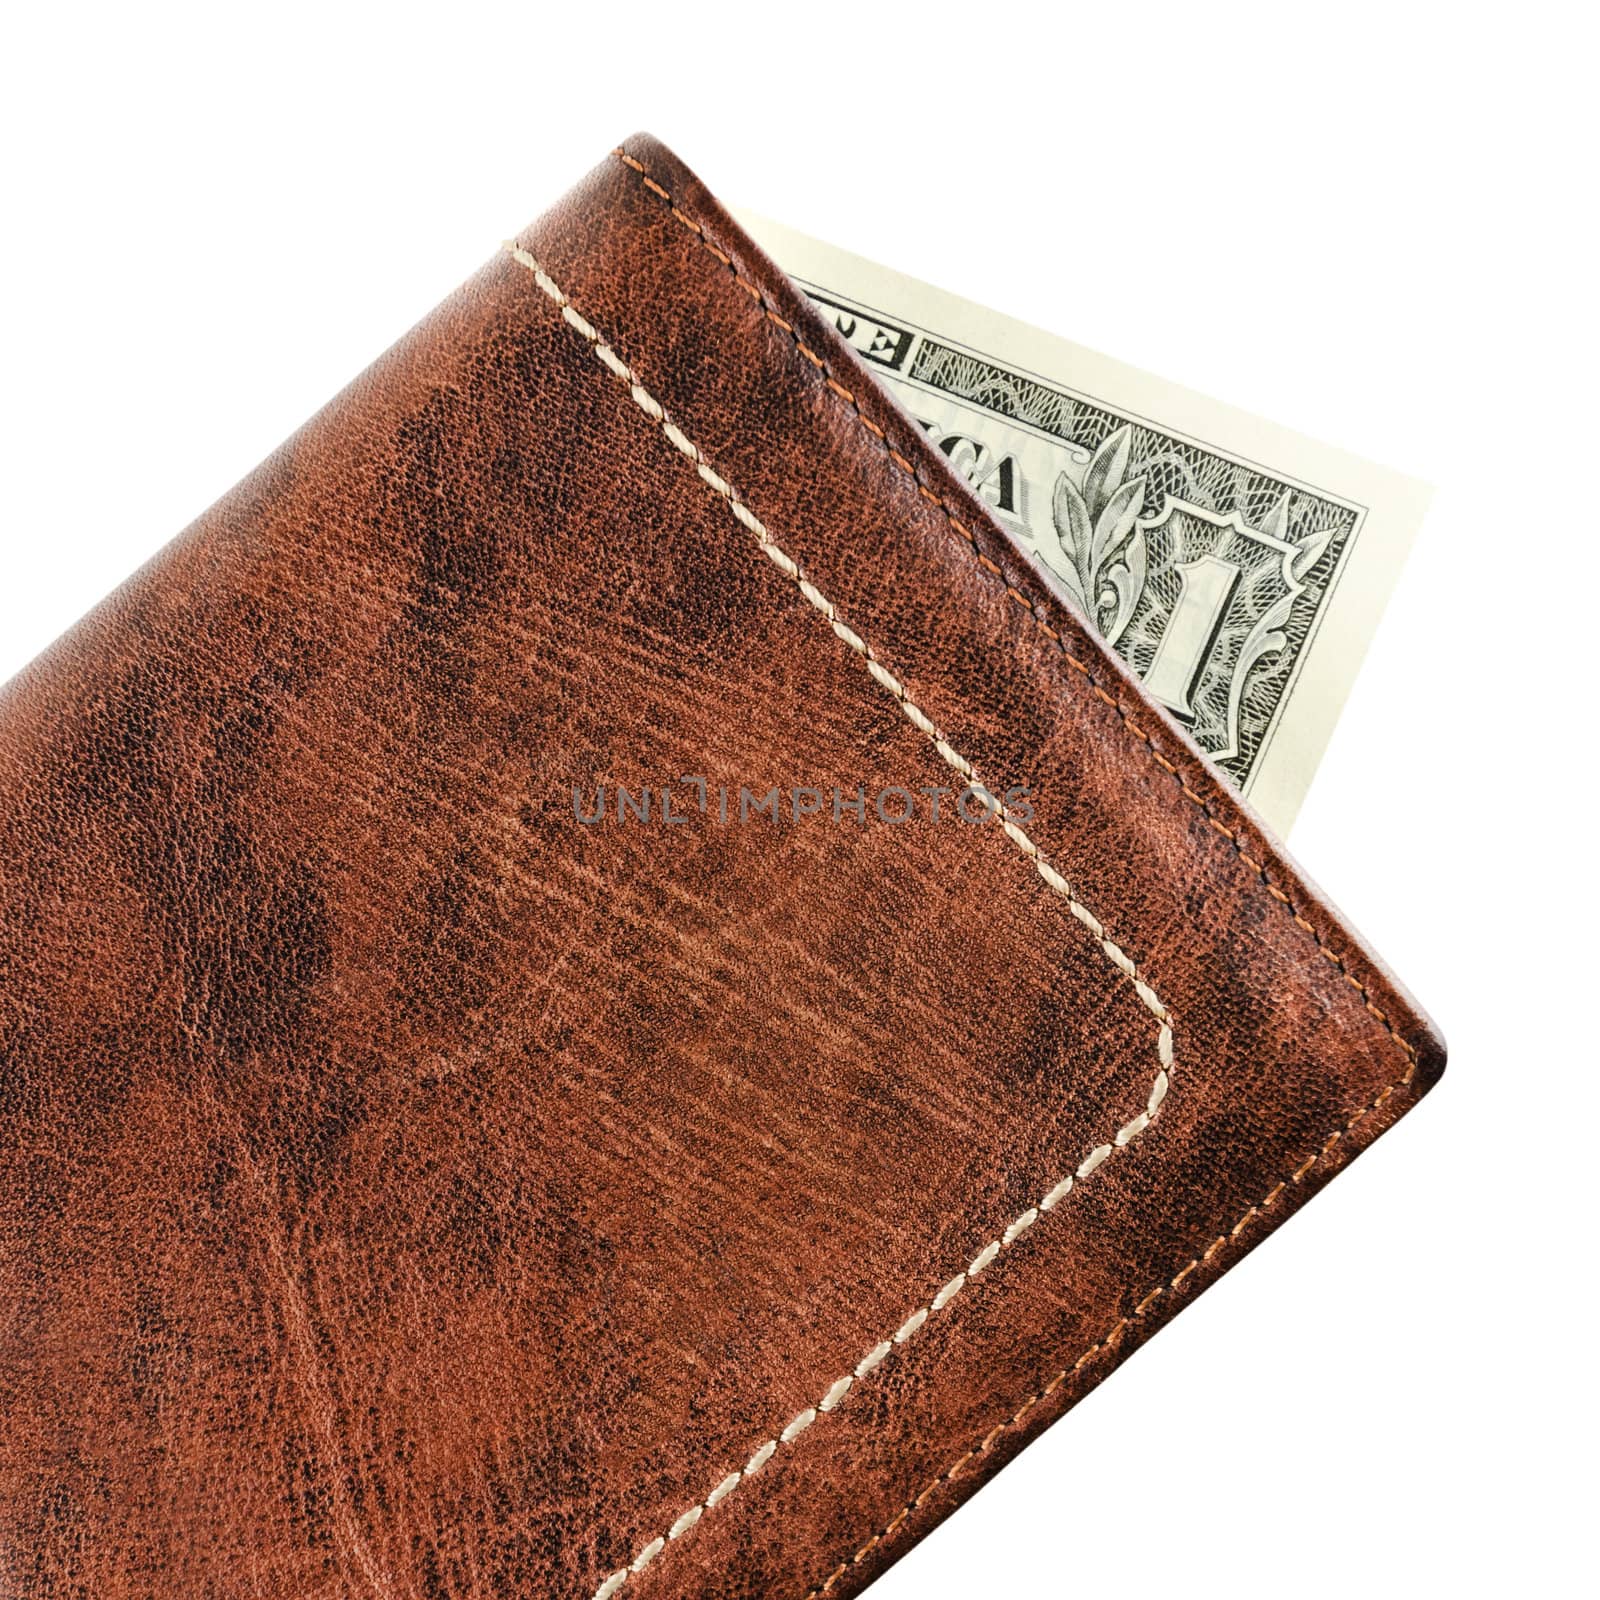 Wallet made ​​of genuine leather over white background